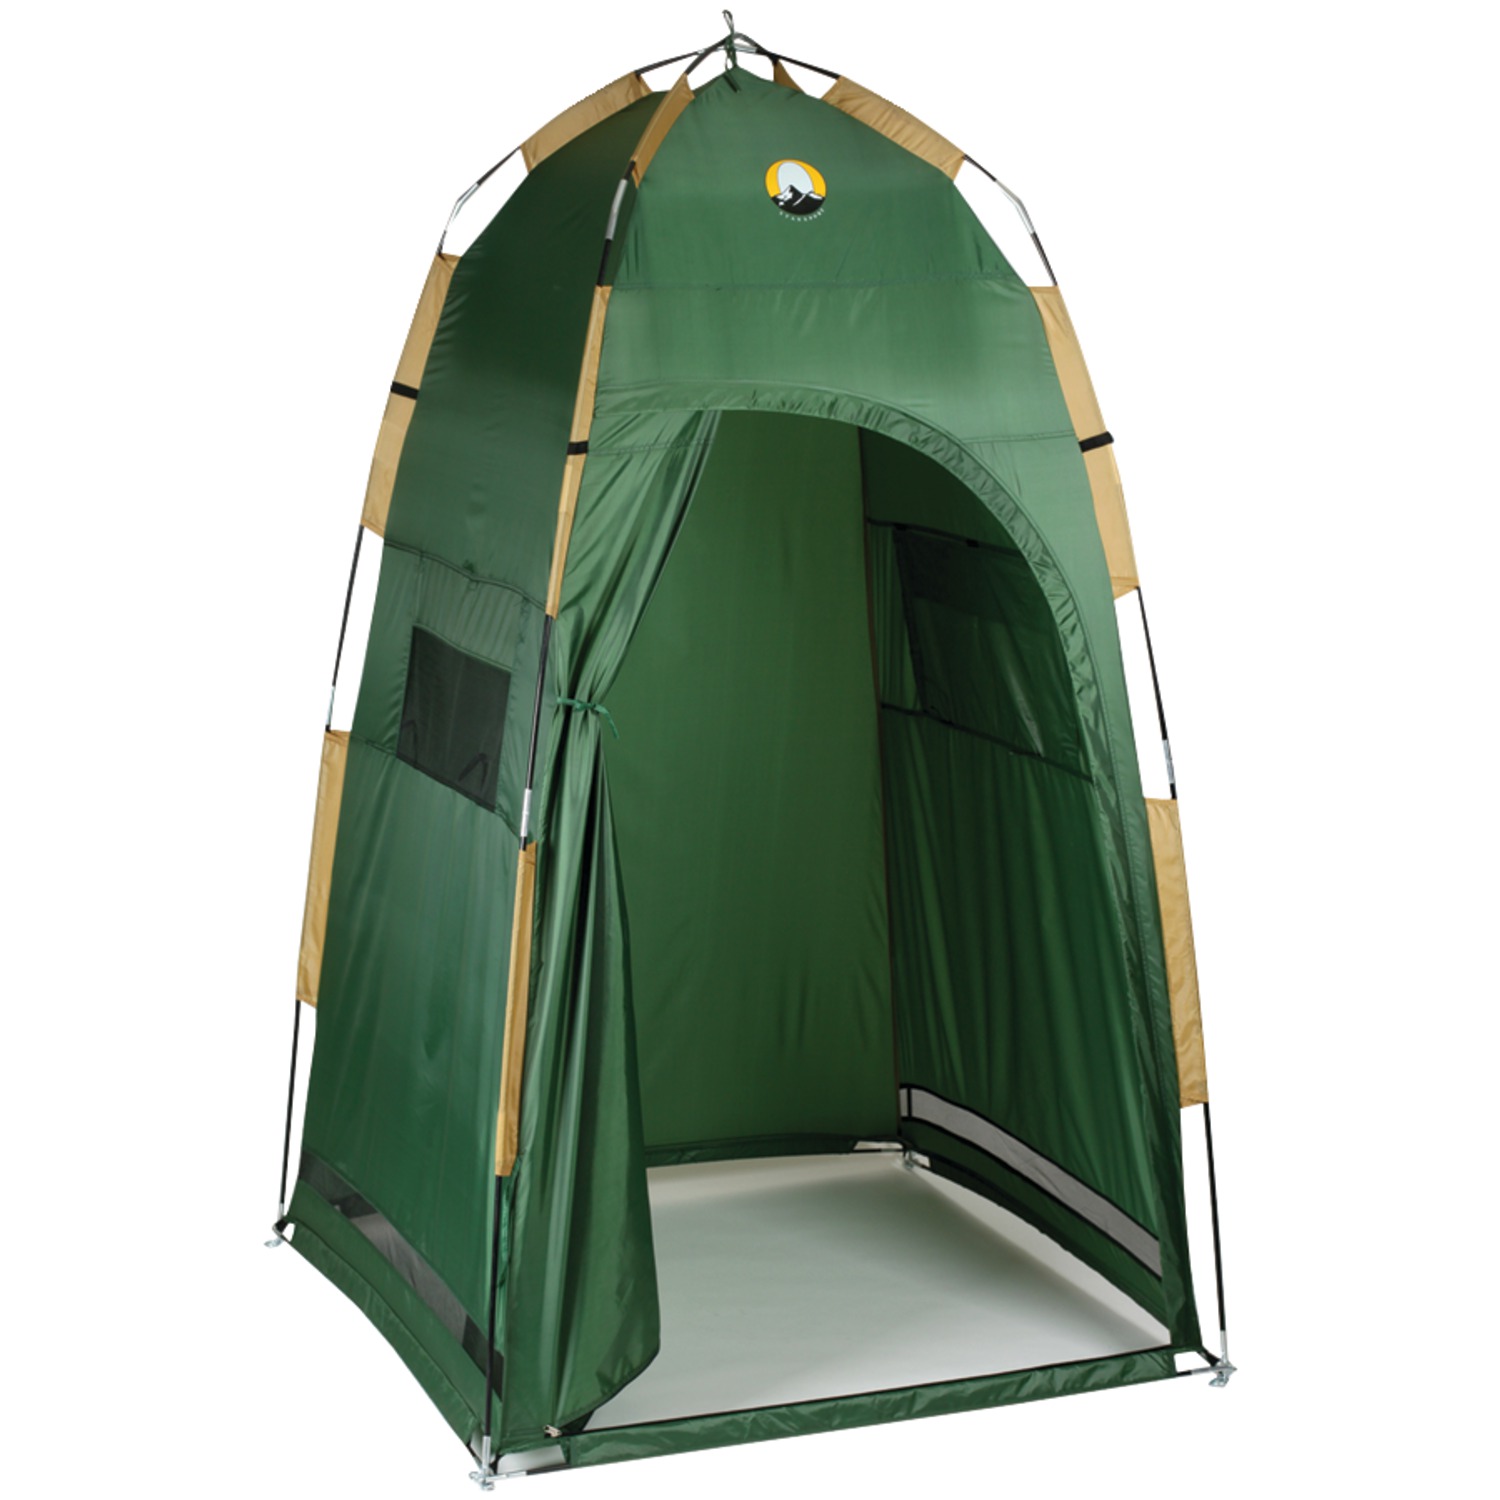 Stansport Cabana Privacy Shelter - image 1 of 4